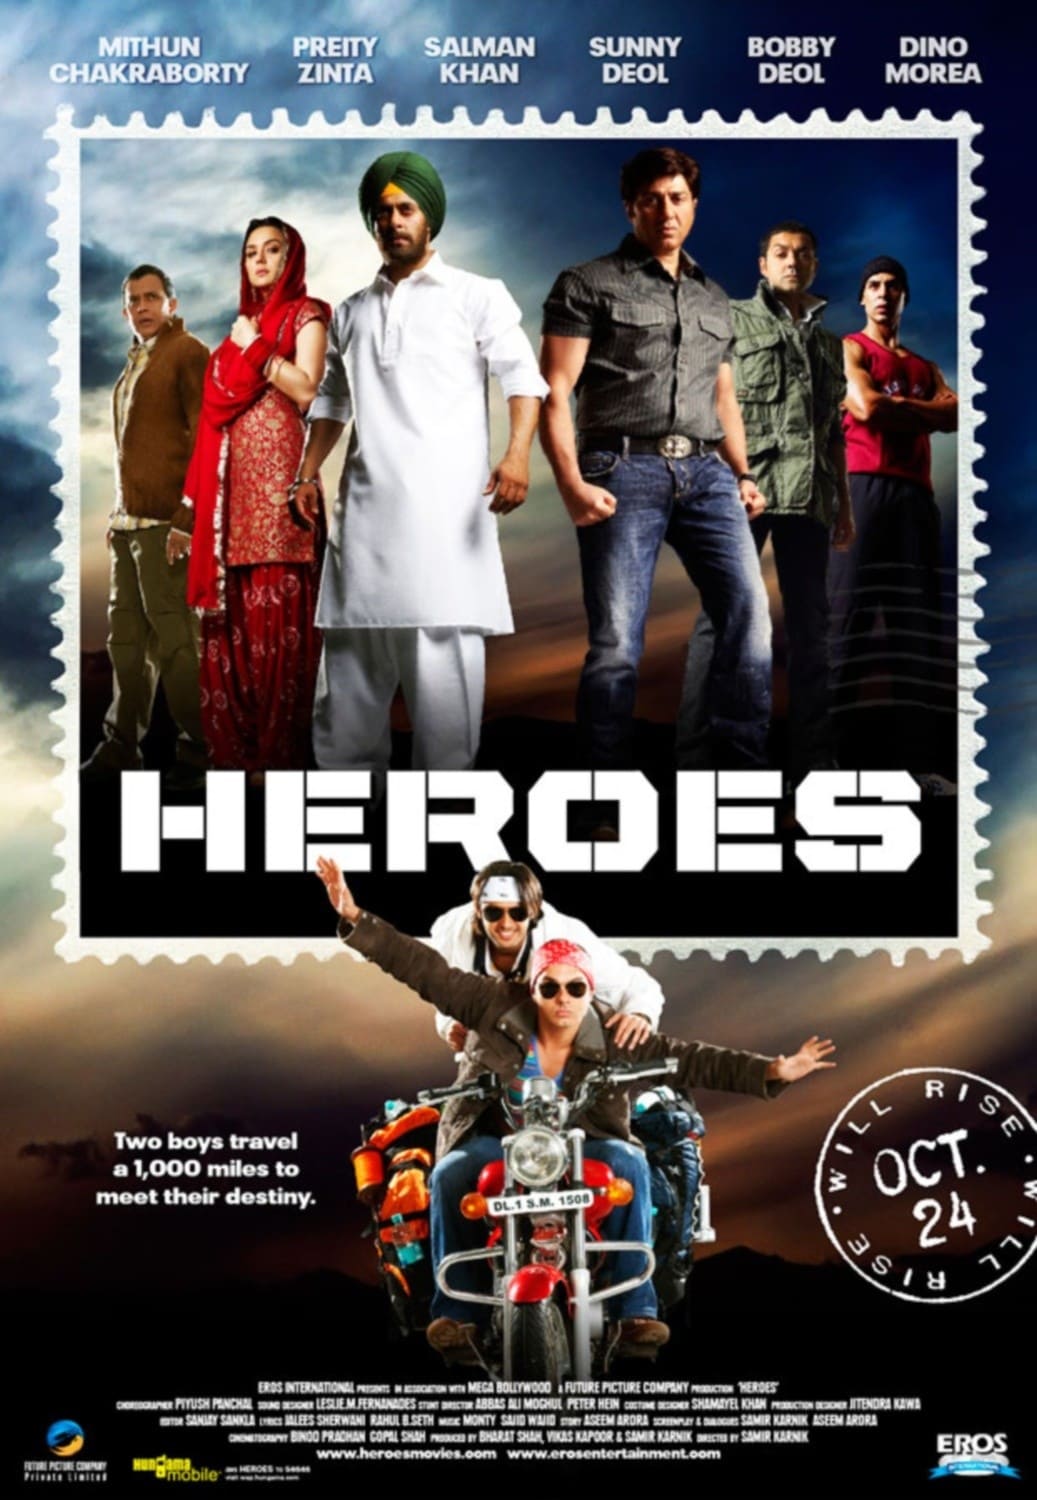 Poster for the movie "Heroes"